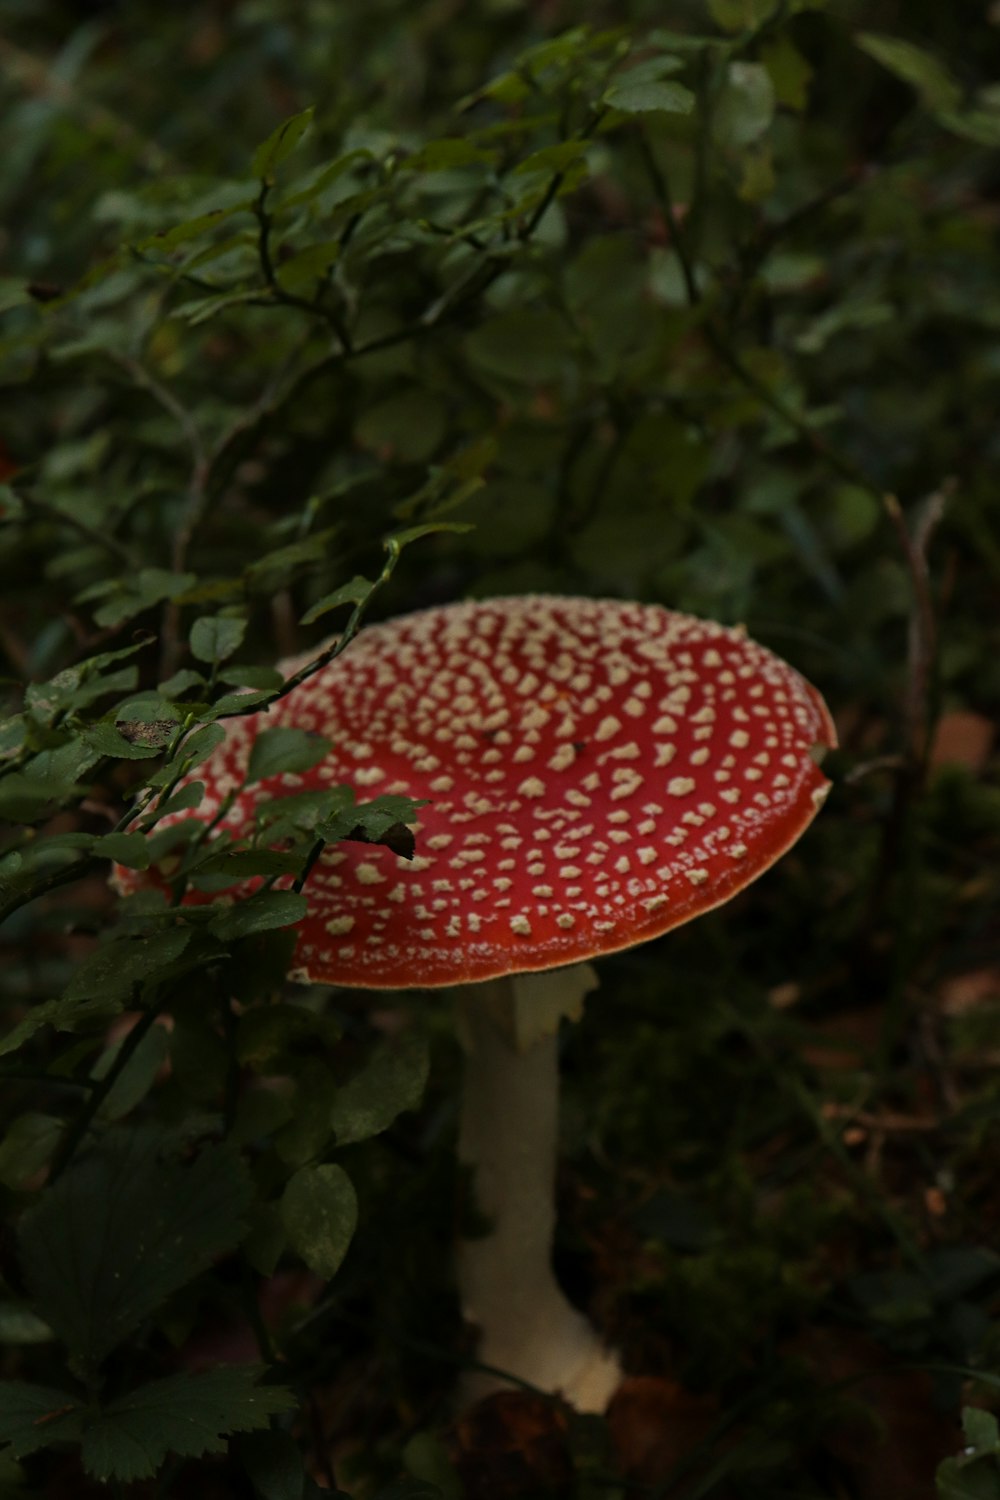 red and white mushroom surrounded by green-leafed plants